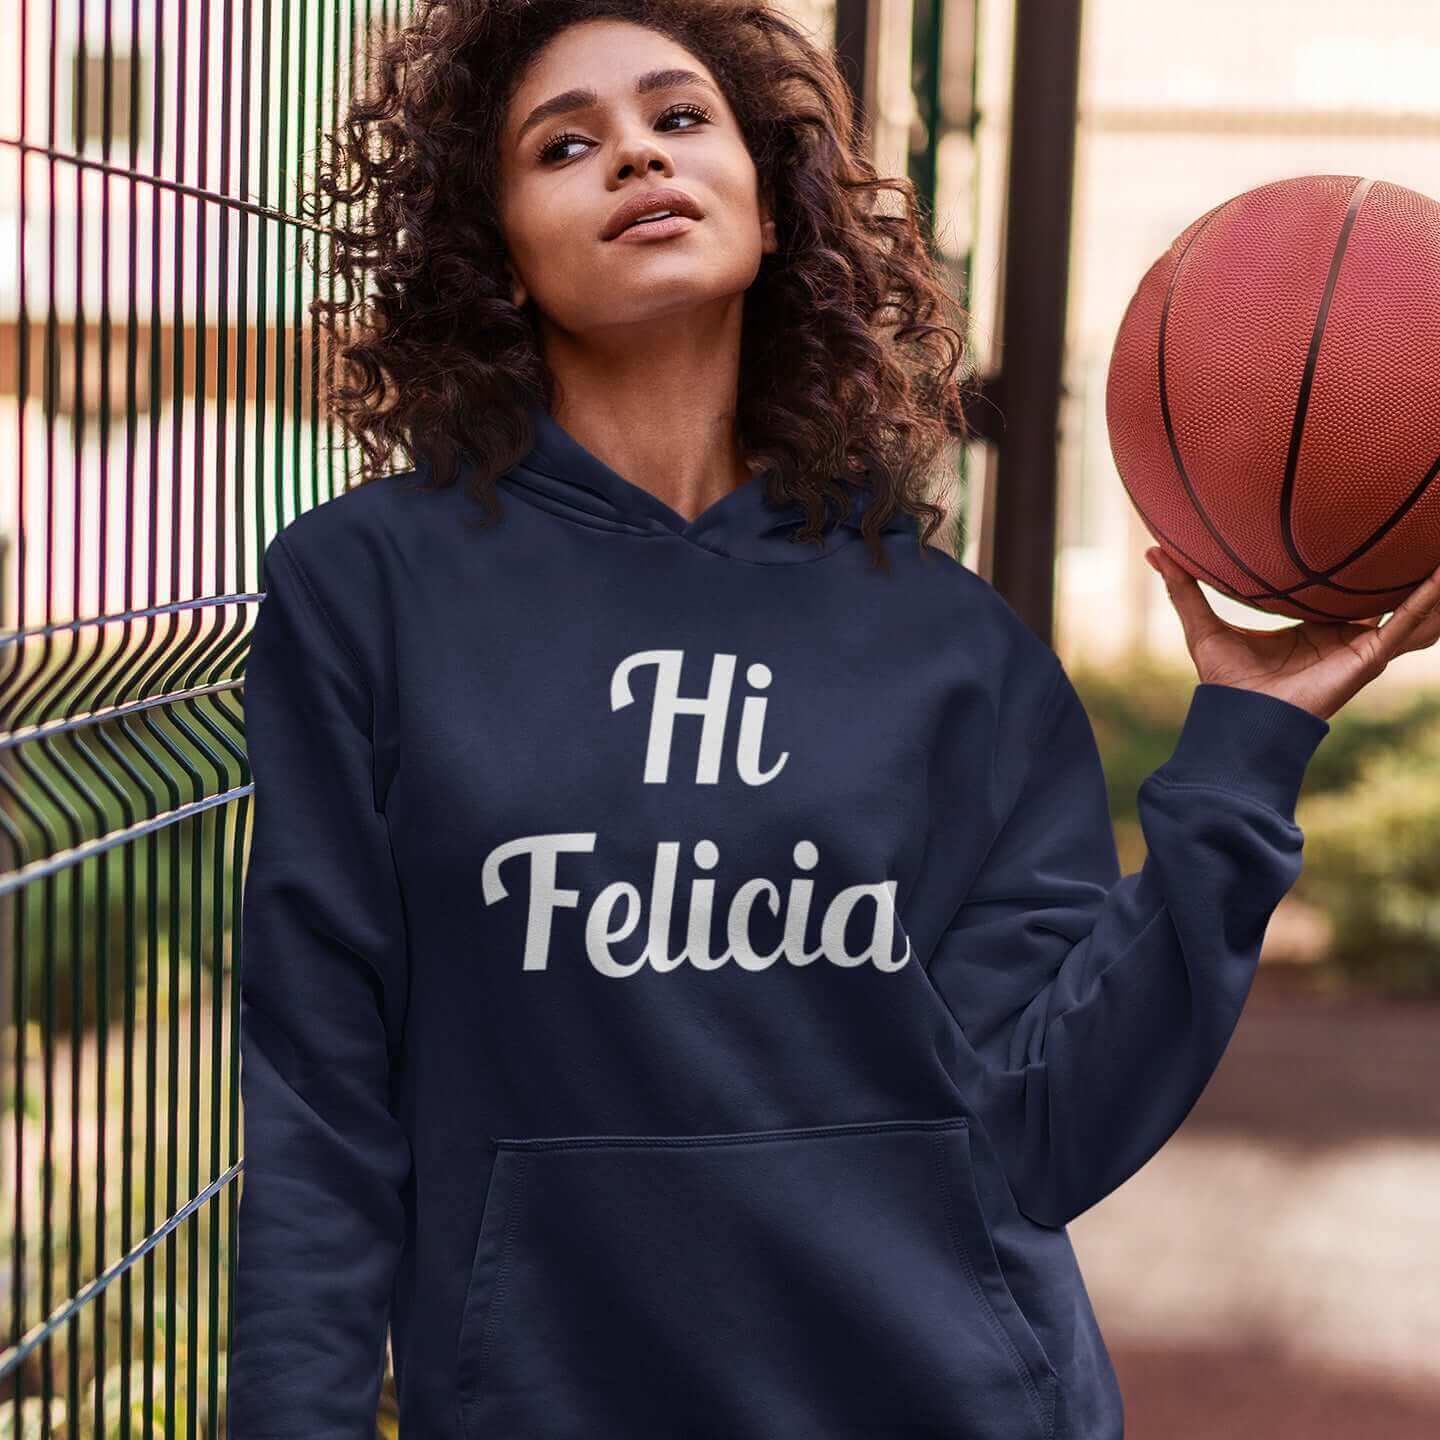 Woman wearing a navy blue hoodie sweatshirt with the words Hi Felicia printed on the front.